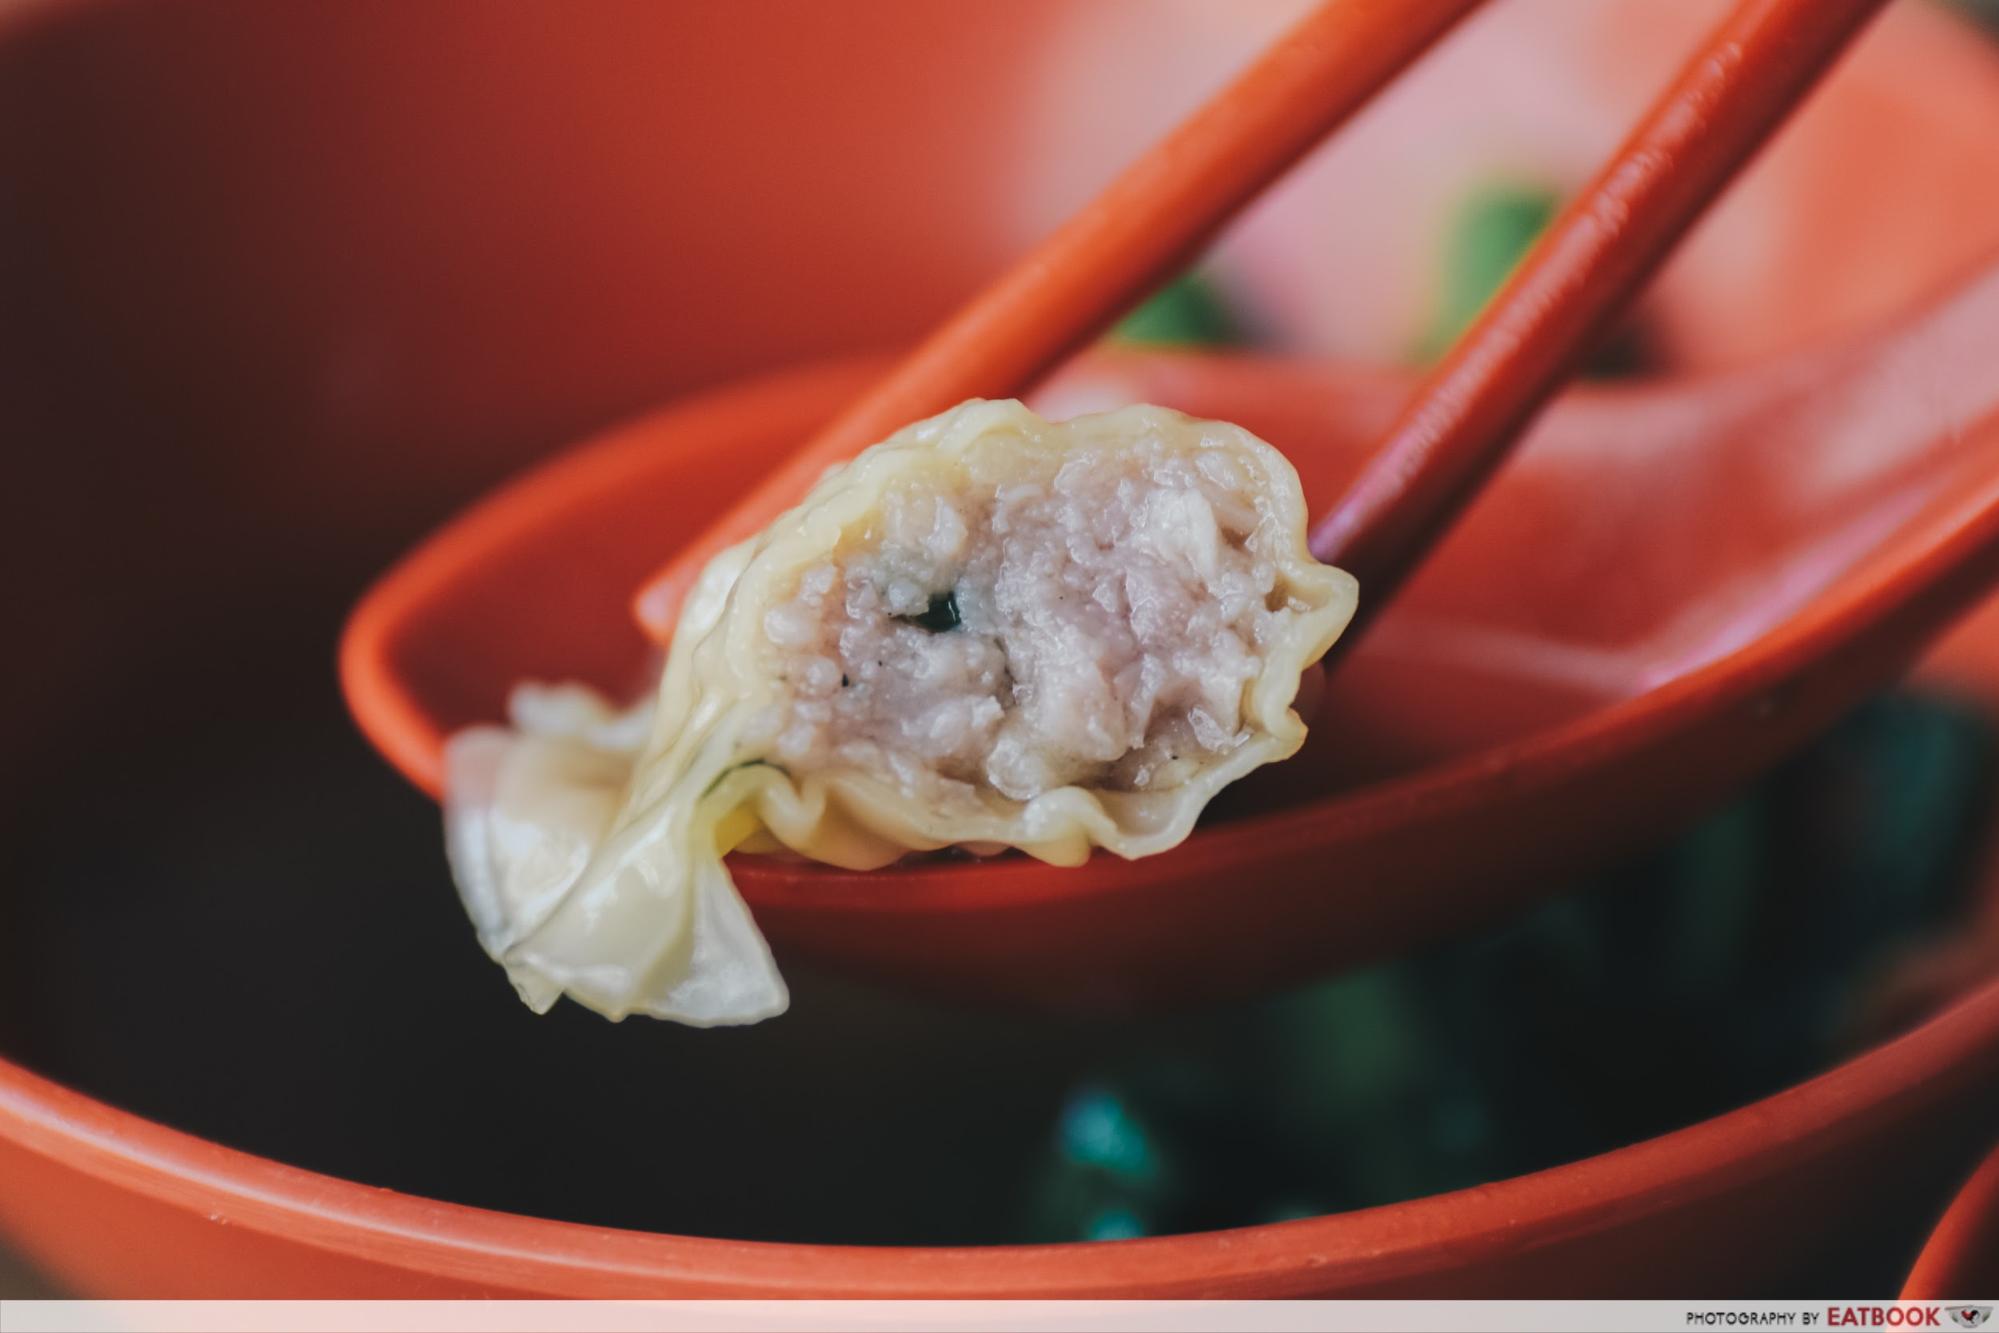 Battle of Chew Kee and Chiew Kee - Chew Kee's dumplings